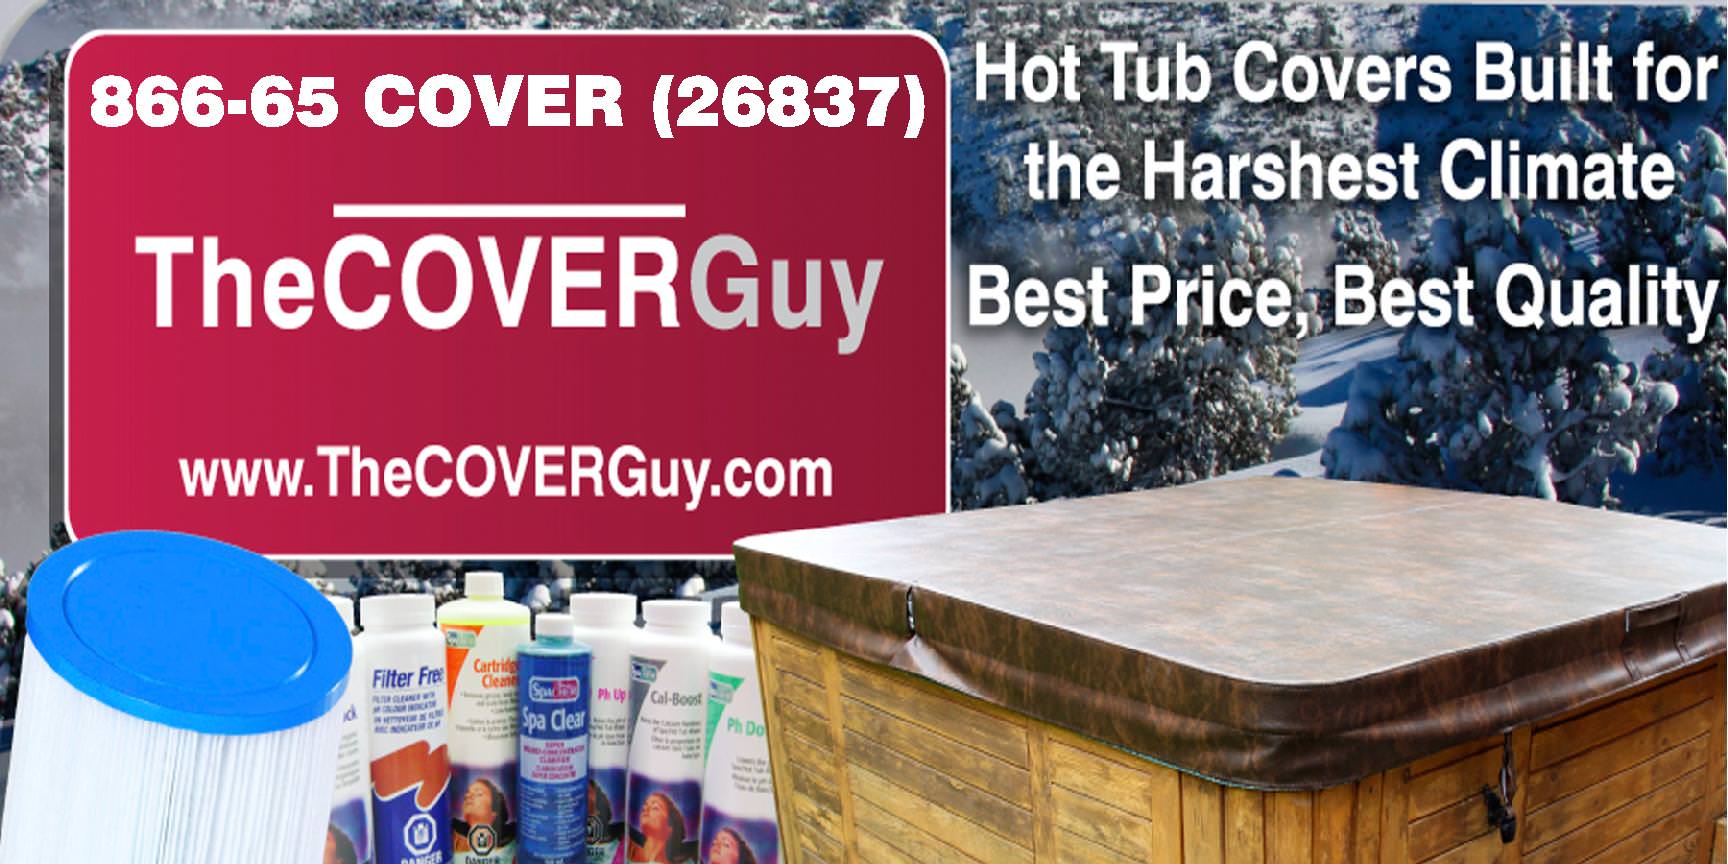 The Cover Guy hot tub covers